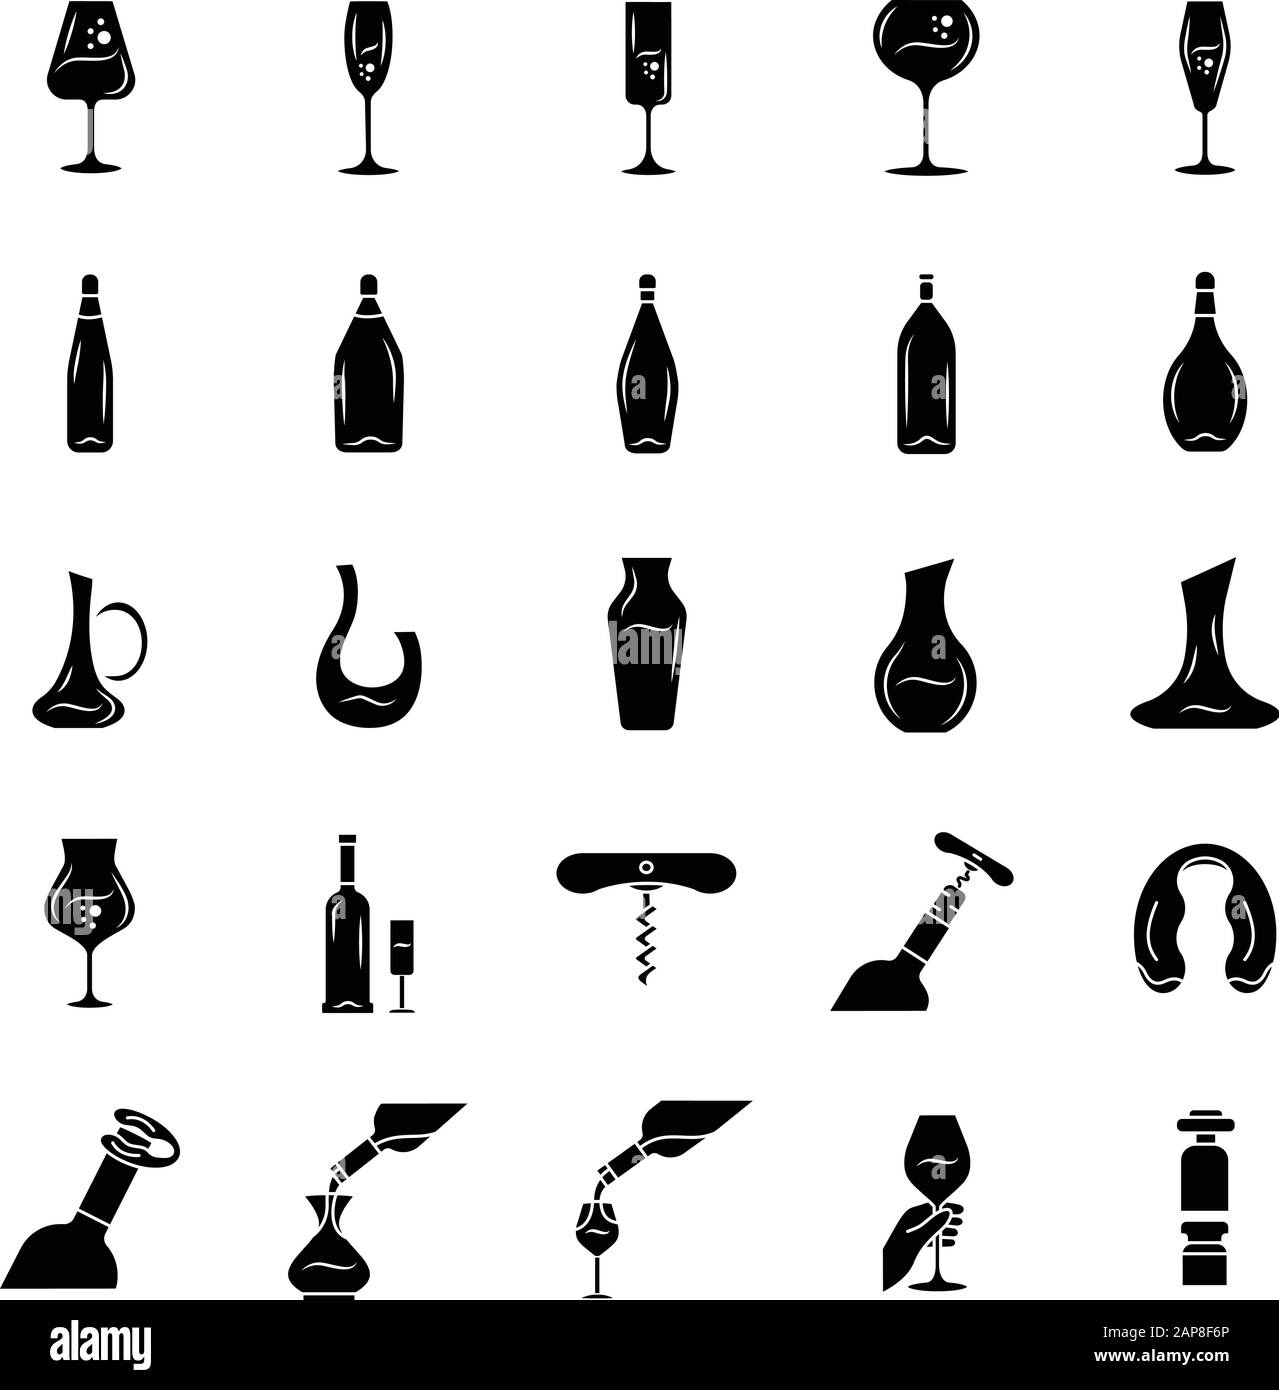 Wine and wineglasses glyph icons set. Different types of glassware and alcohol beverages. Party, bar, restaurant decanters, bottles. Barman tools. Sil Stock Vector